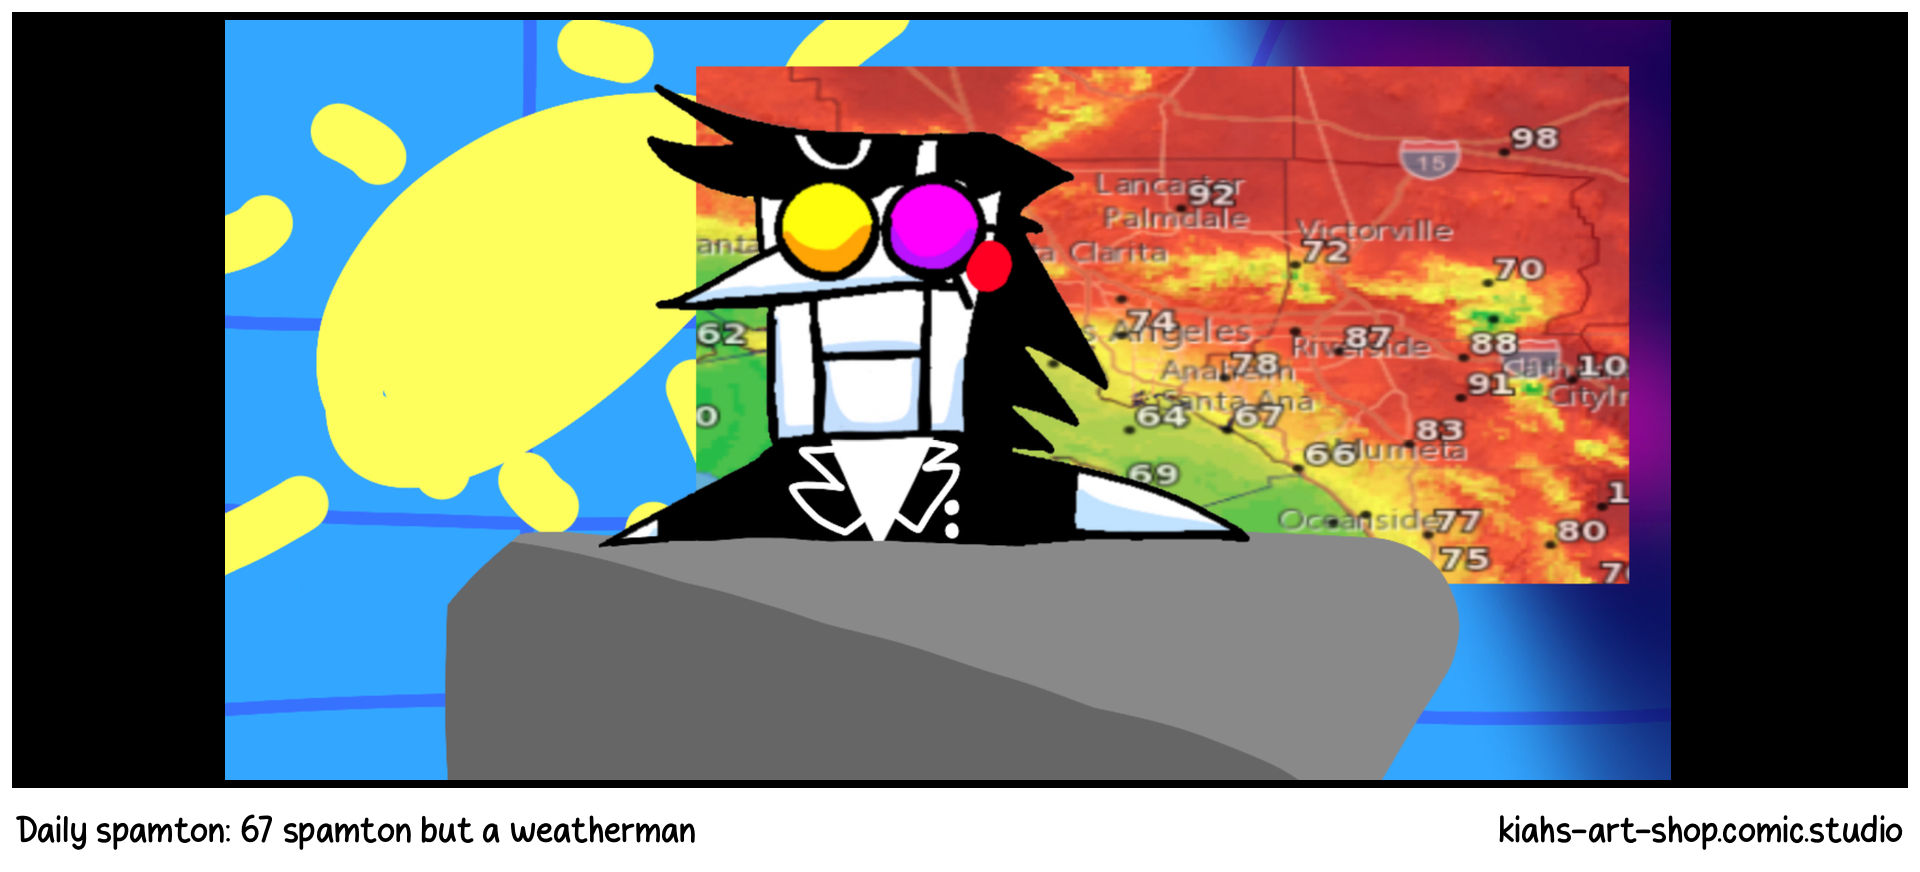 Daily spamton: 67 spamton but a weatherman